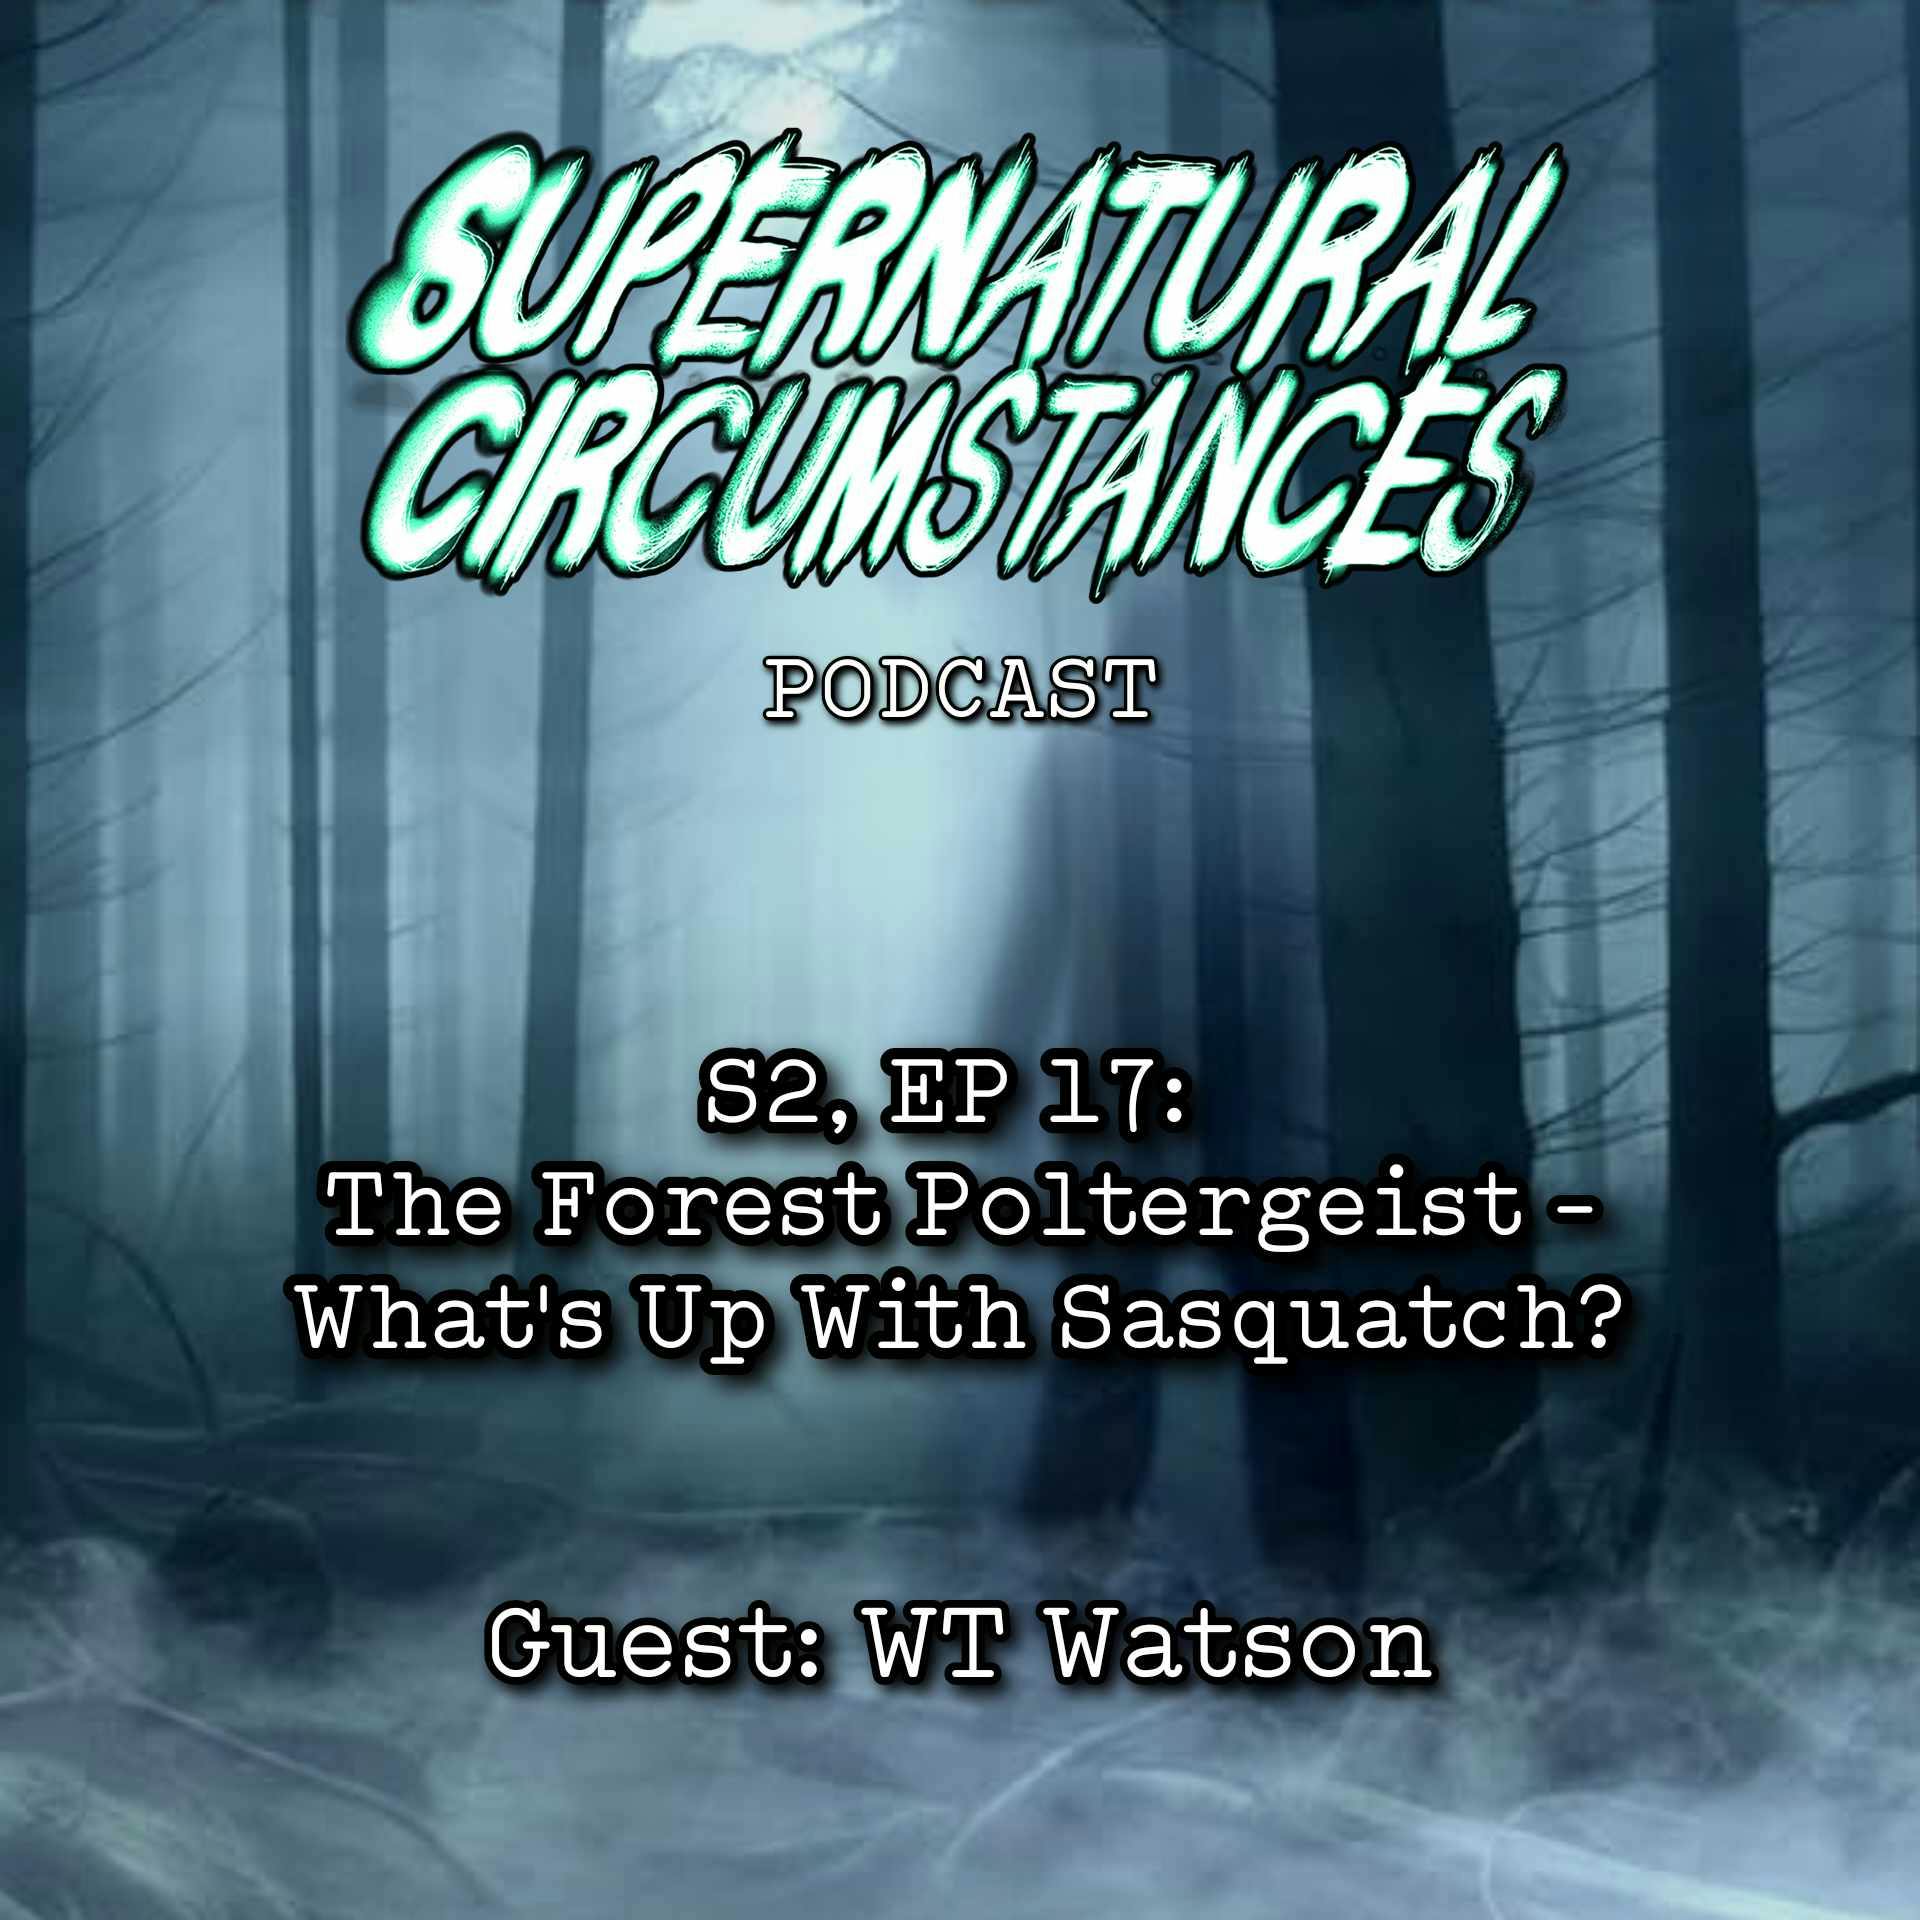 The Forest Poltergeist - What's Up With Sasquatch?